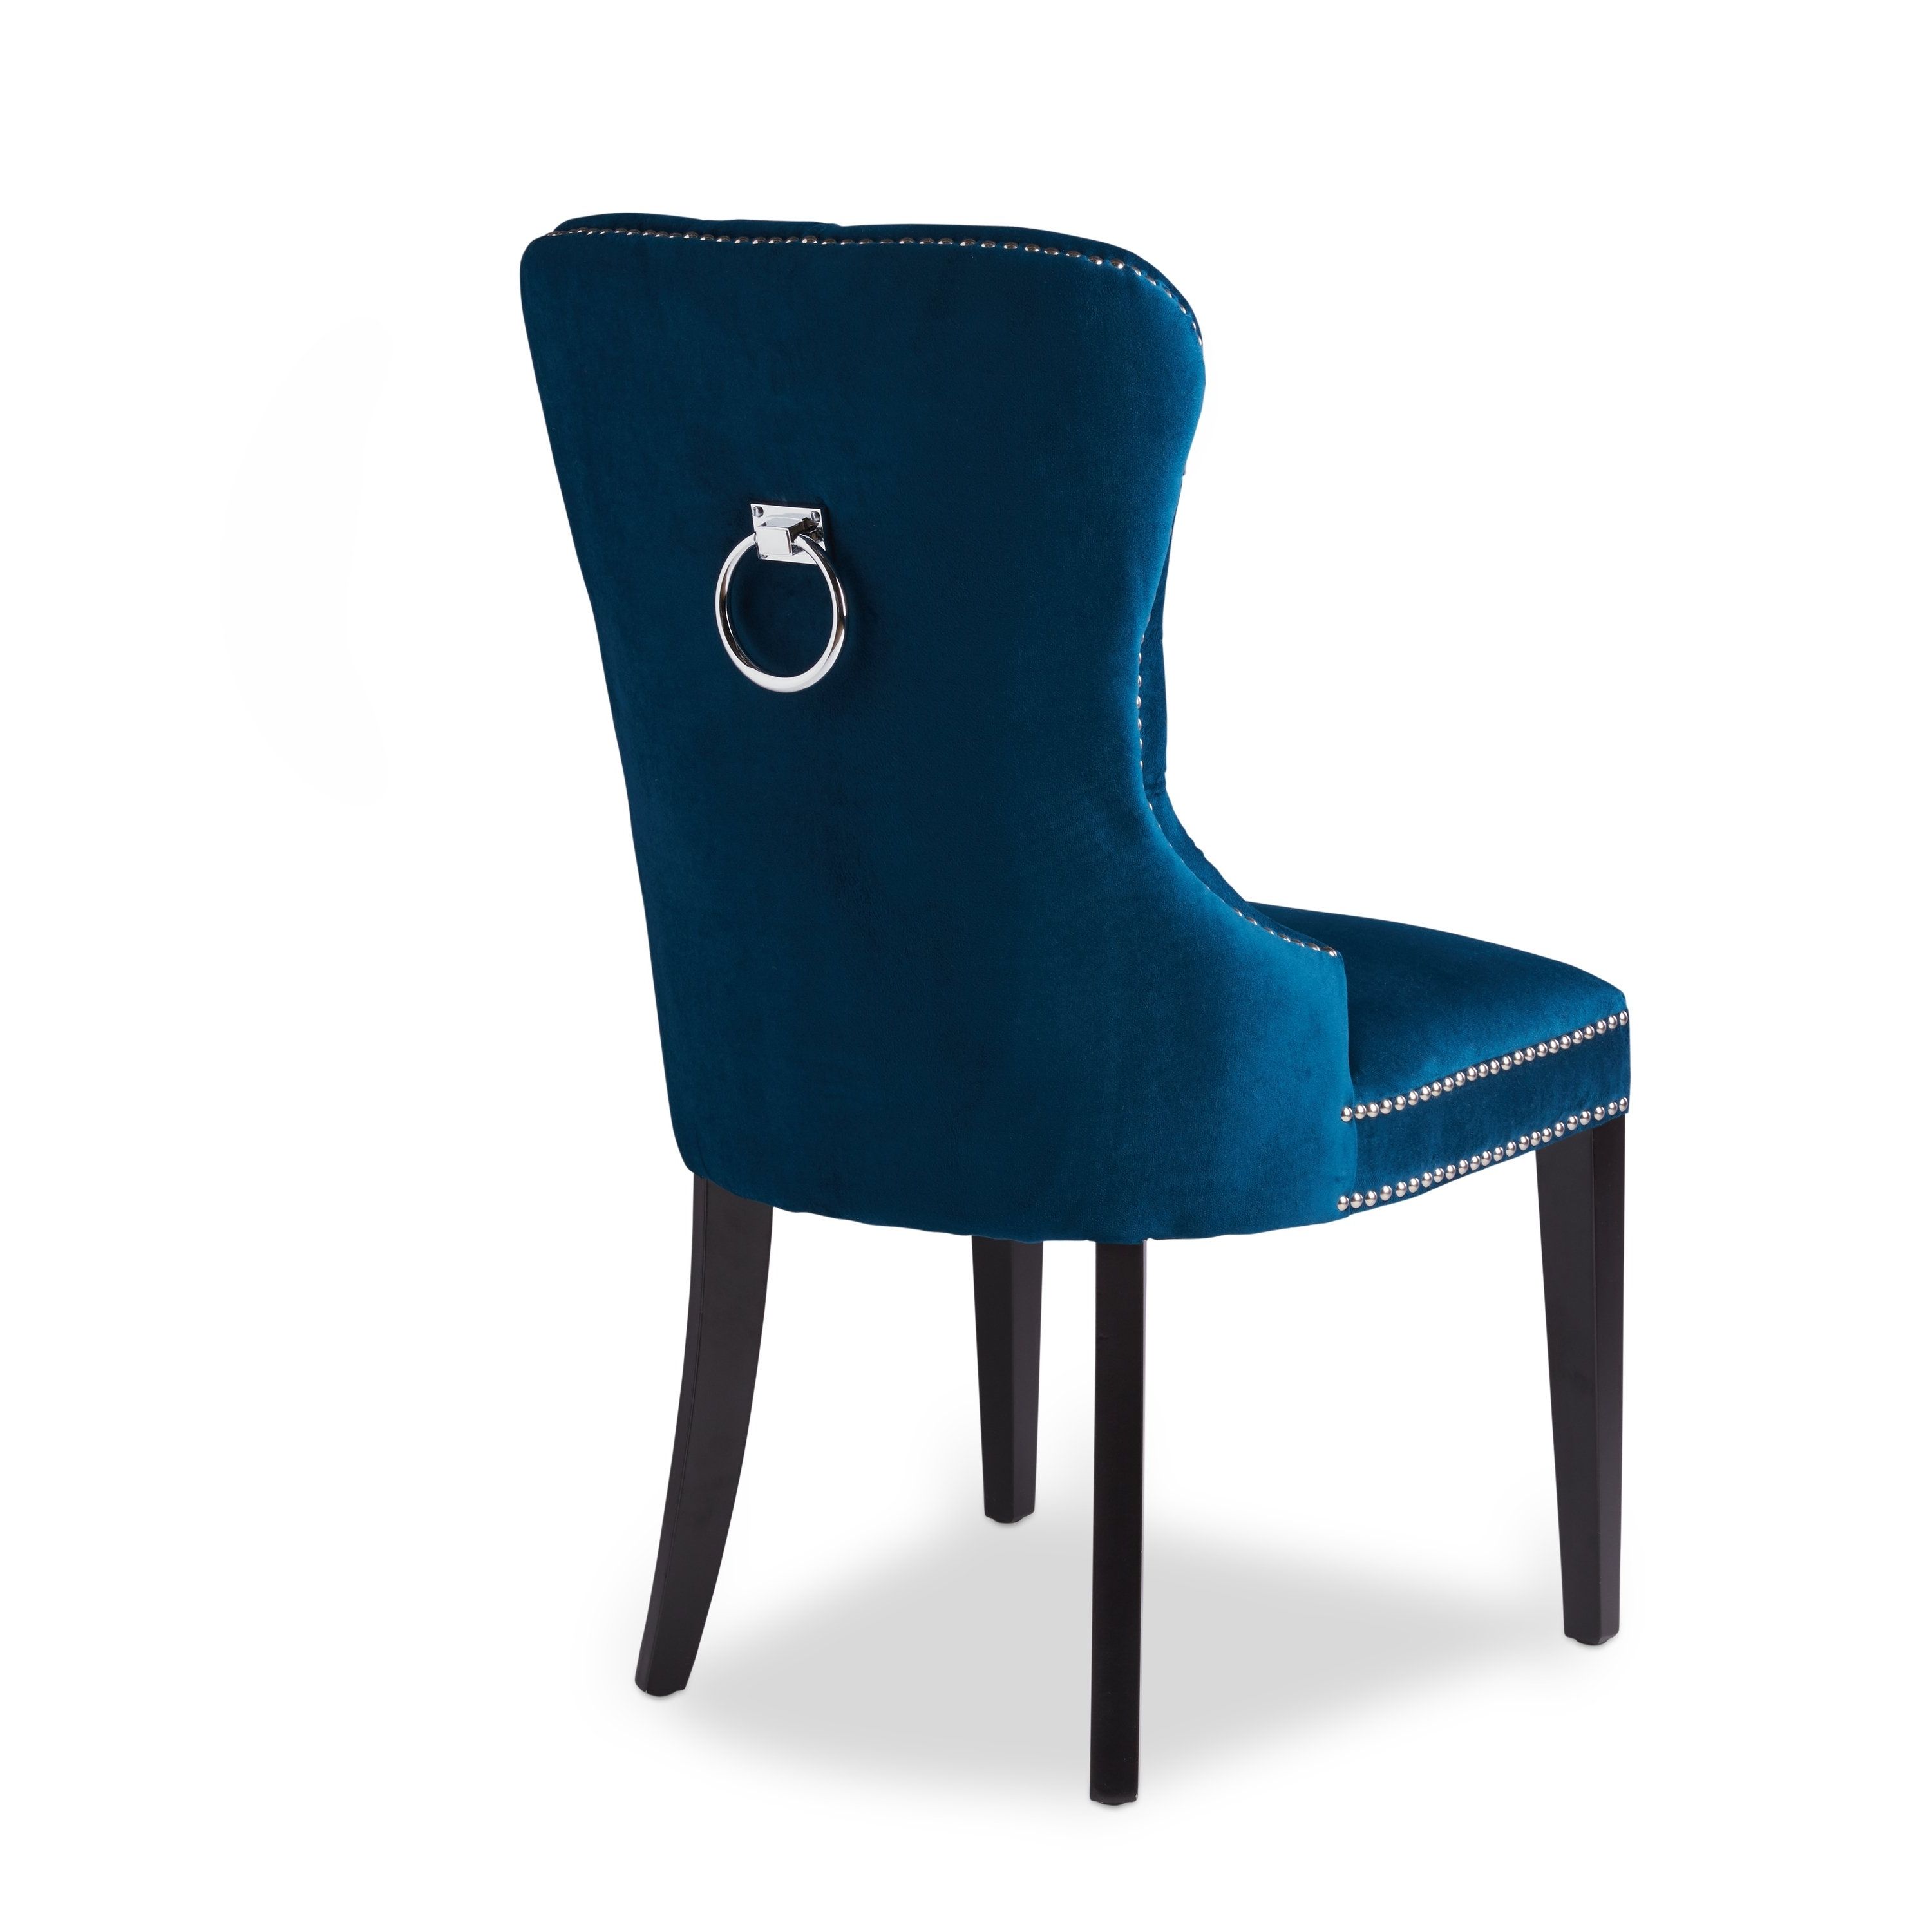 Pilo Blue Side Chairs Inside Well Known Shop Abbyson Versailles Blue Tufted Dining Chair – On Sale – Free (View 10 of 20)